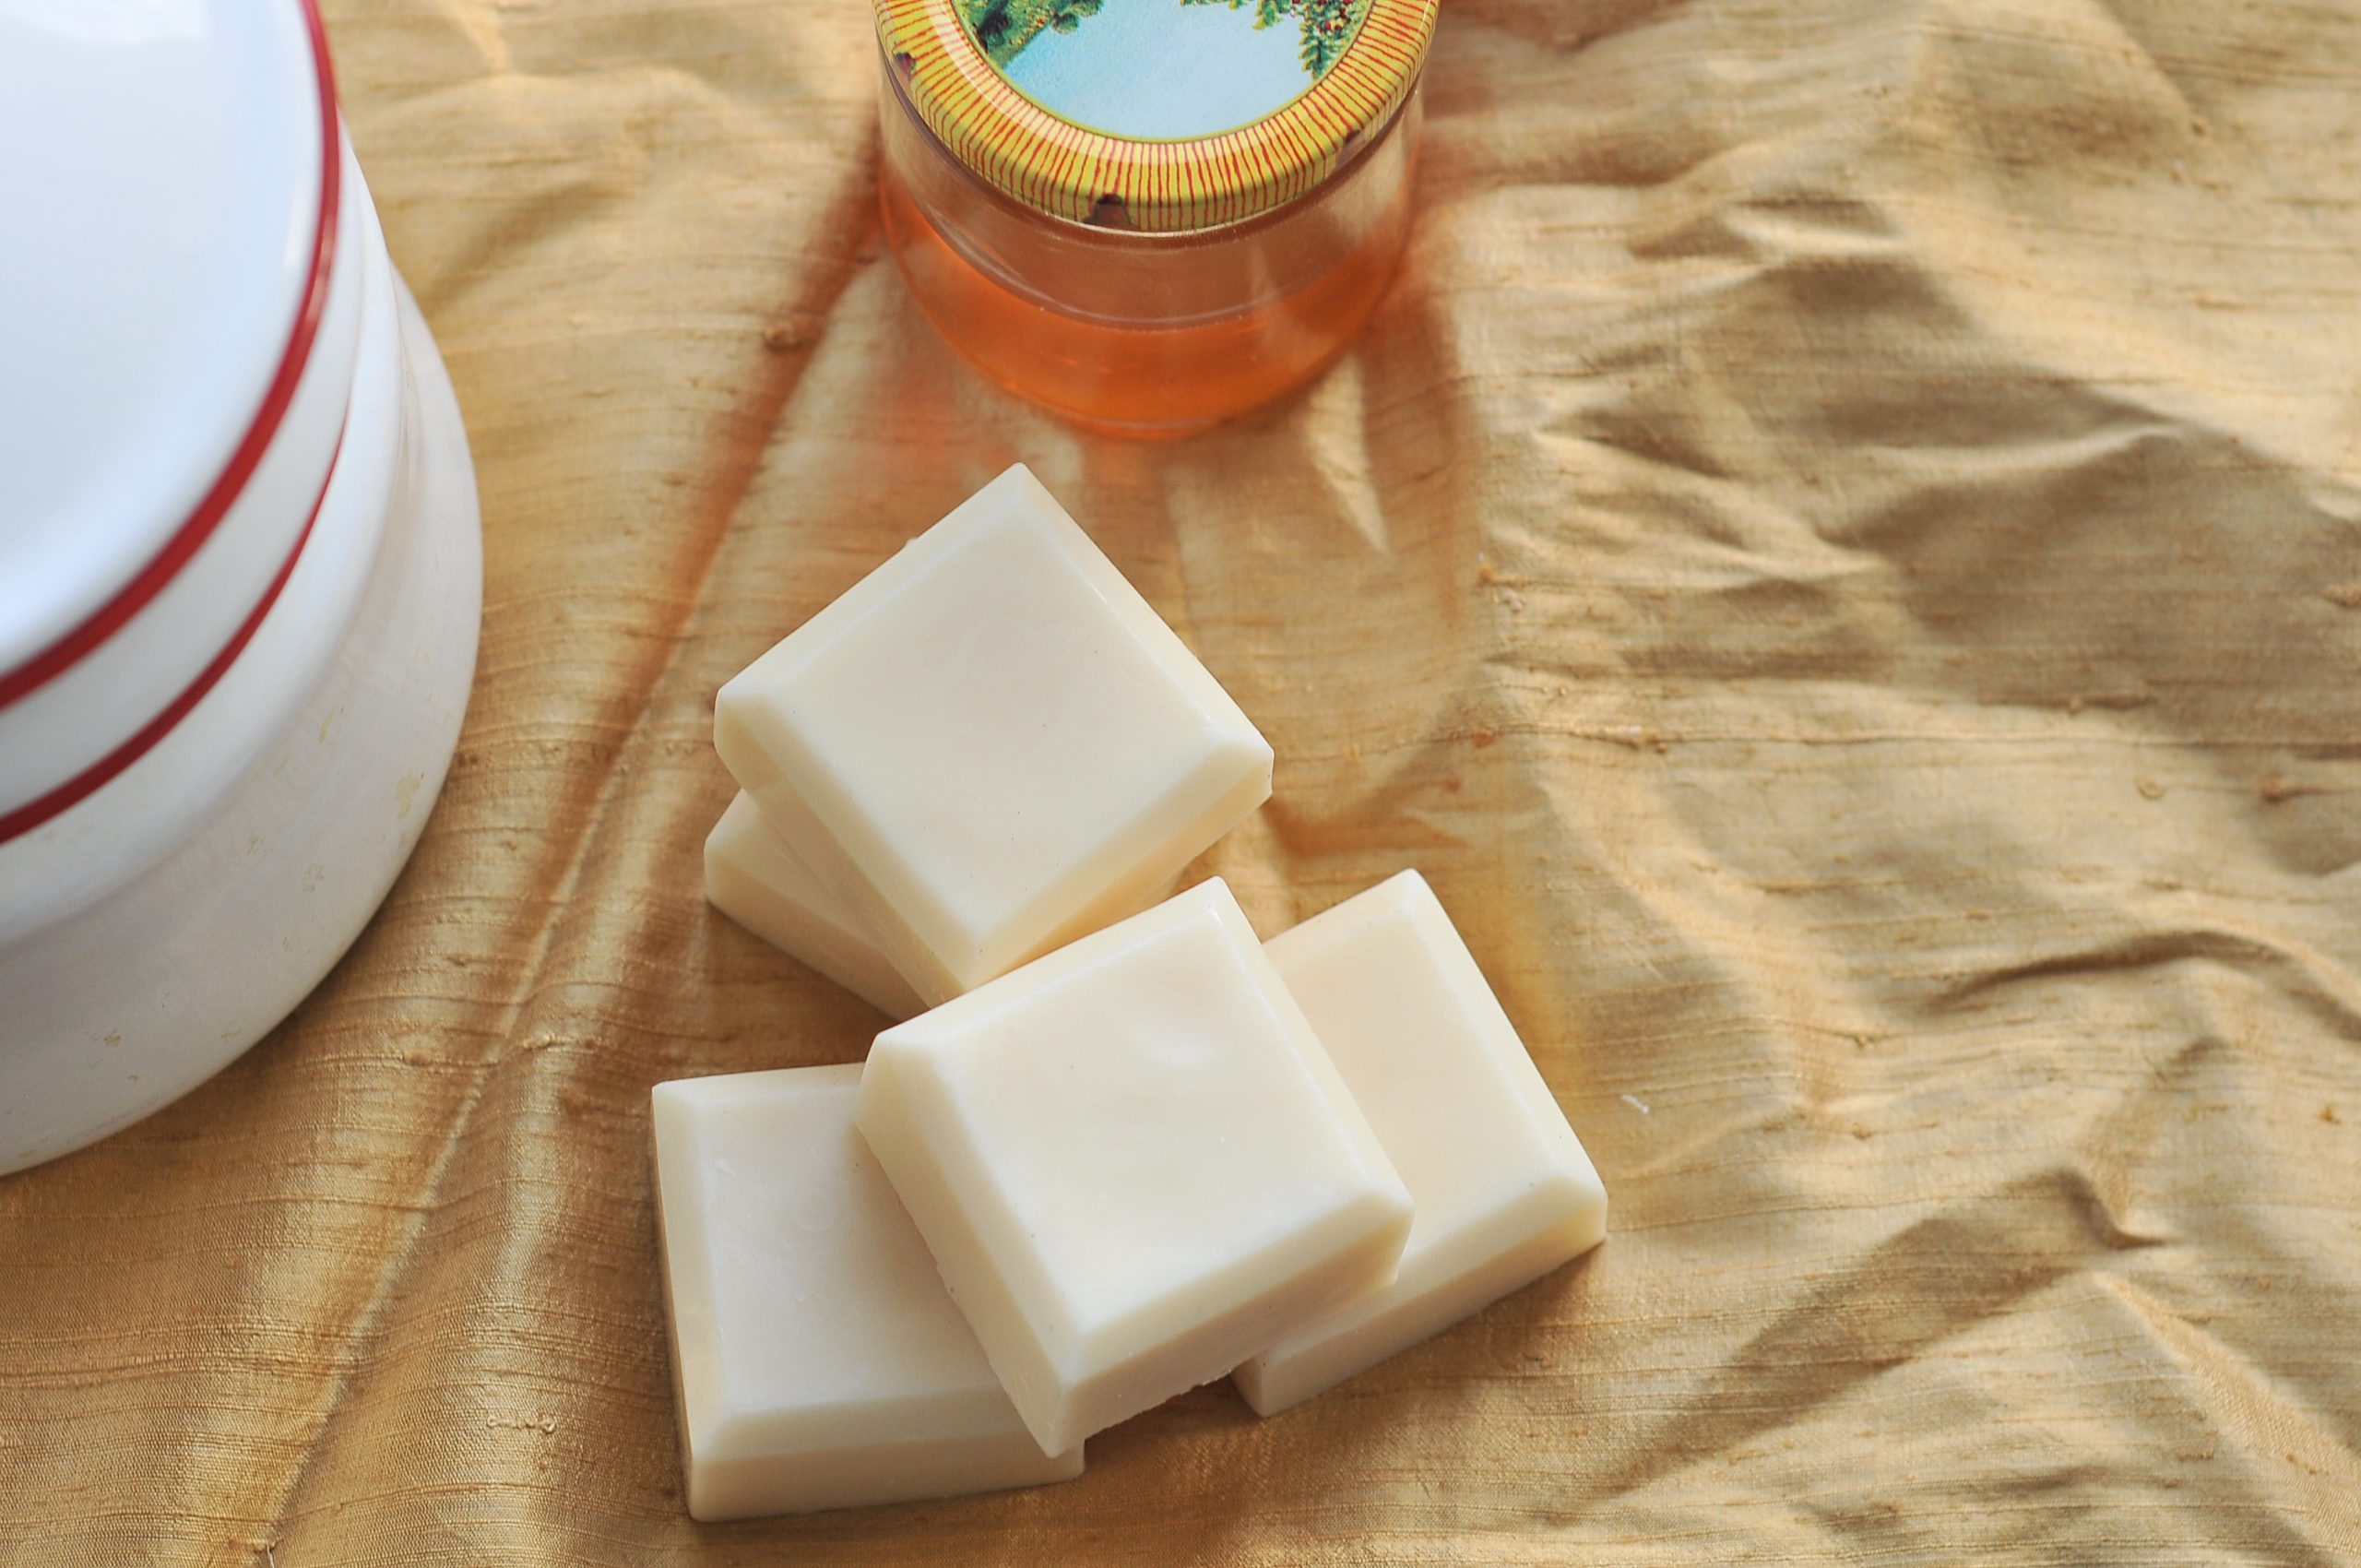 How to Make Melt and Pour Soap with Honey Soap Base 